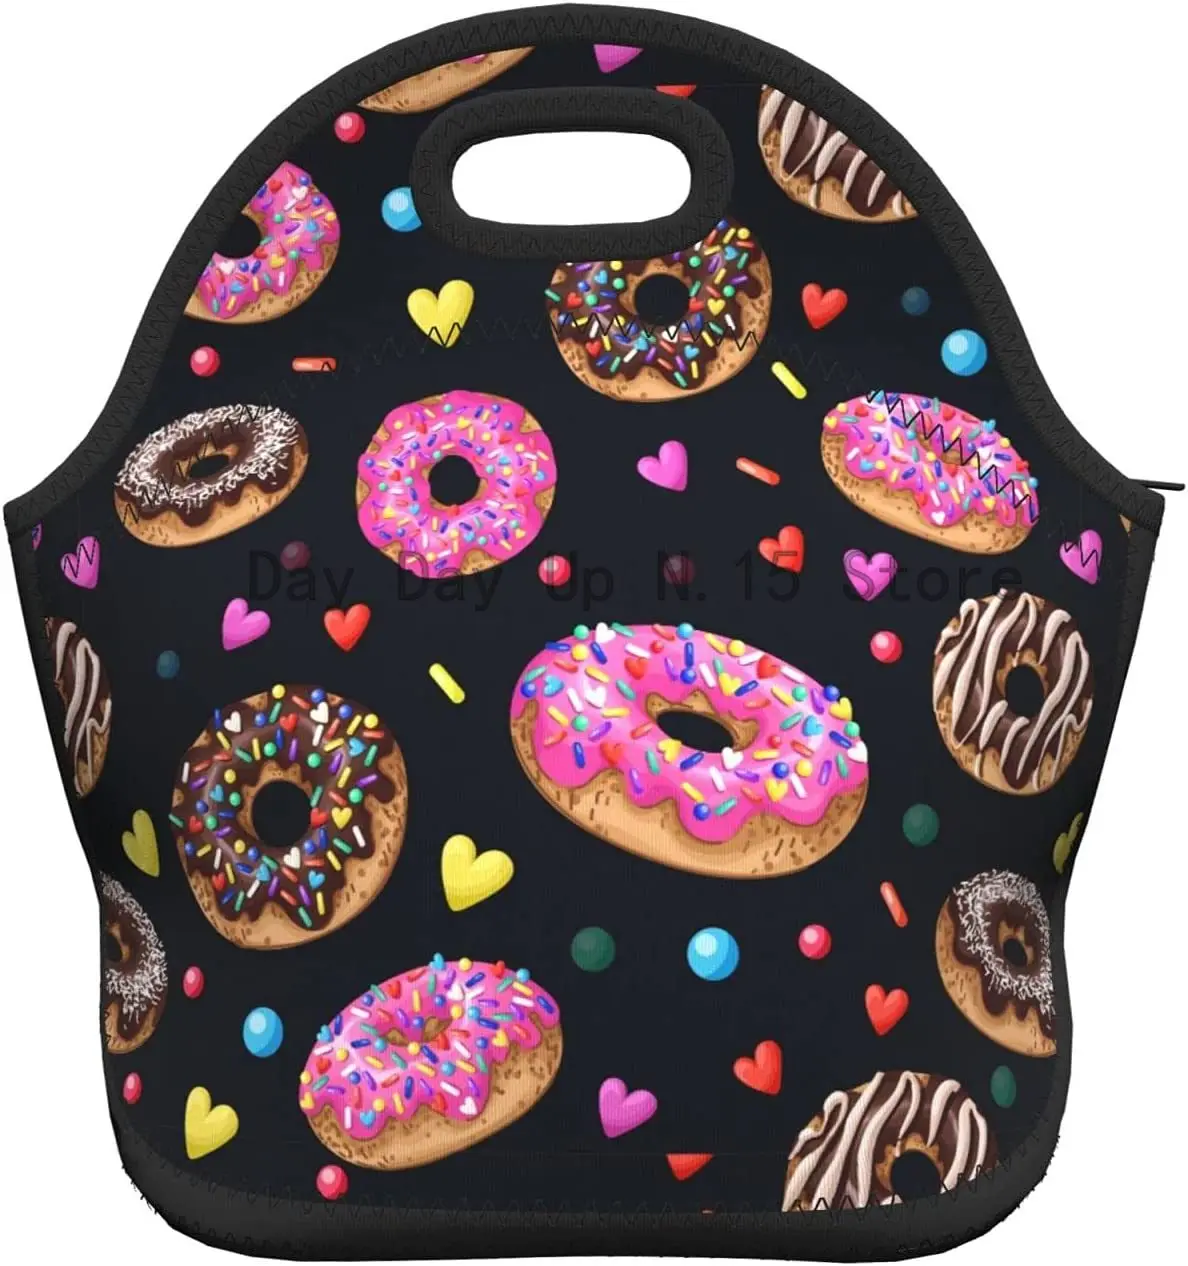 

Colorful Donut Insulated Neoprene Lunch Bag Waterproof Zip Closure with Reusable Large Capacity Outdoor Picnic Food Container